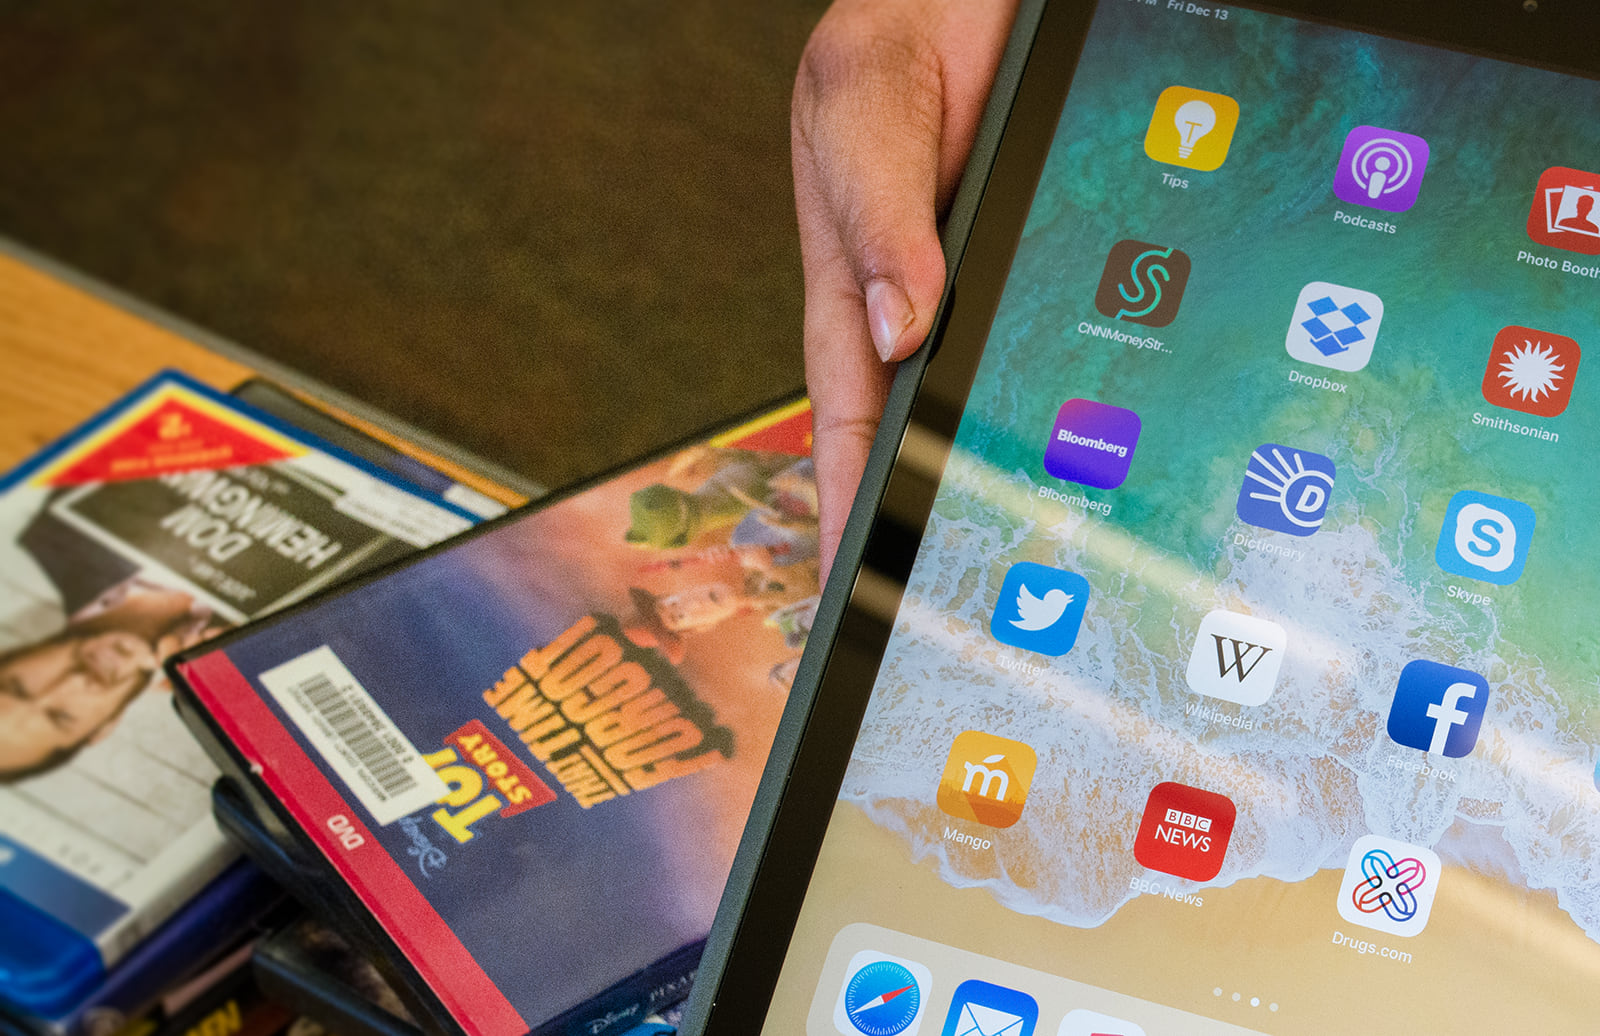 Photo of an iPad on top of DVDs